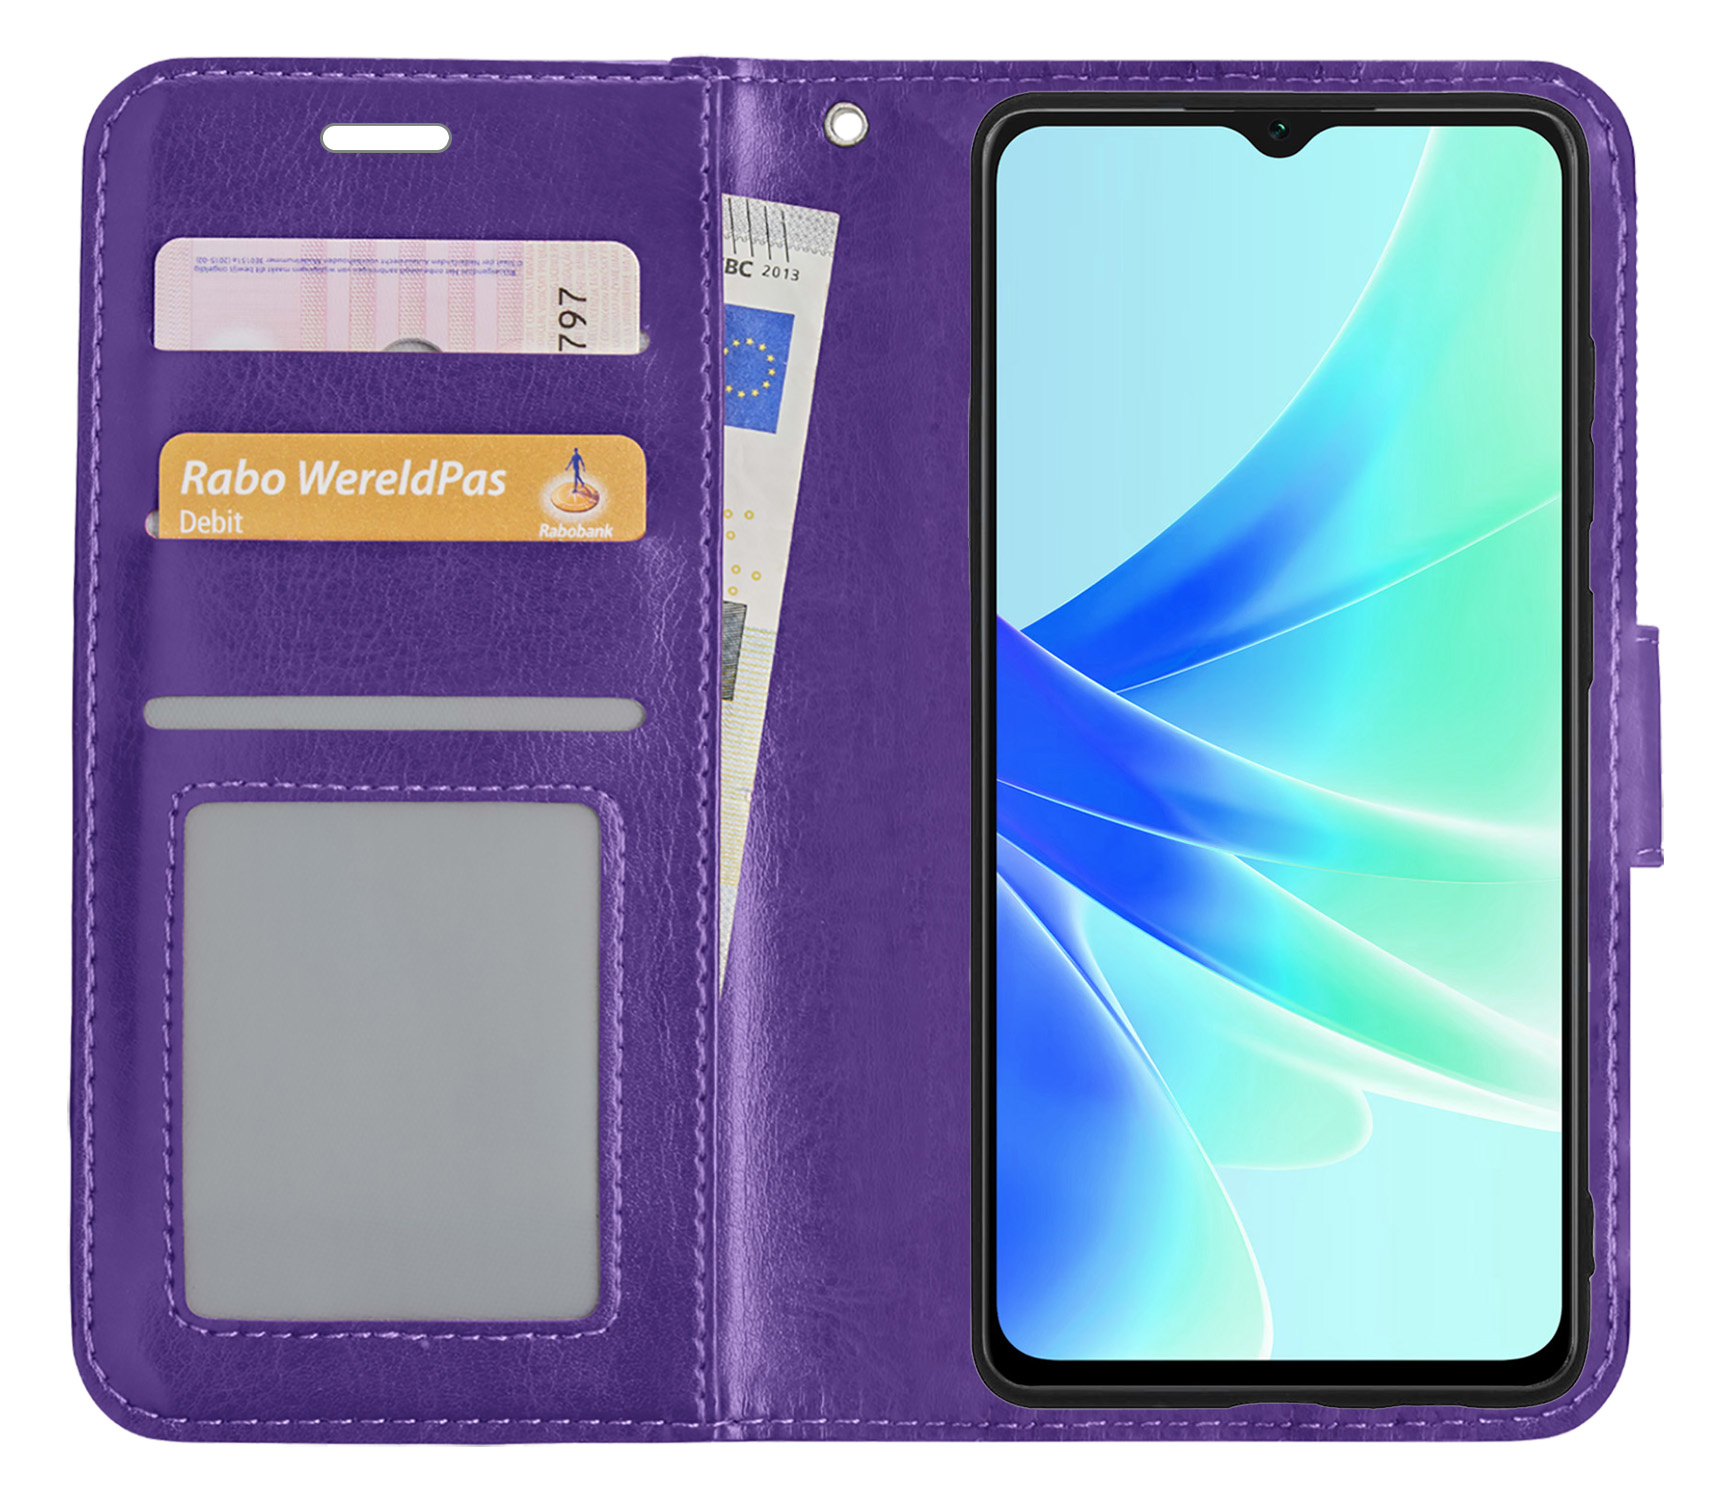 Hoes Geschikt voor OPPO A17 Hoesje Bookcase Hoes Flip Case Book Cover - Hoesje Geschikt voor OPPO A17 Hoes Book Case Hoesje - Paars